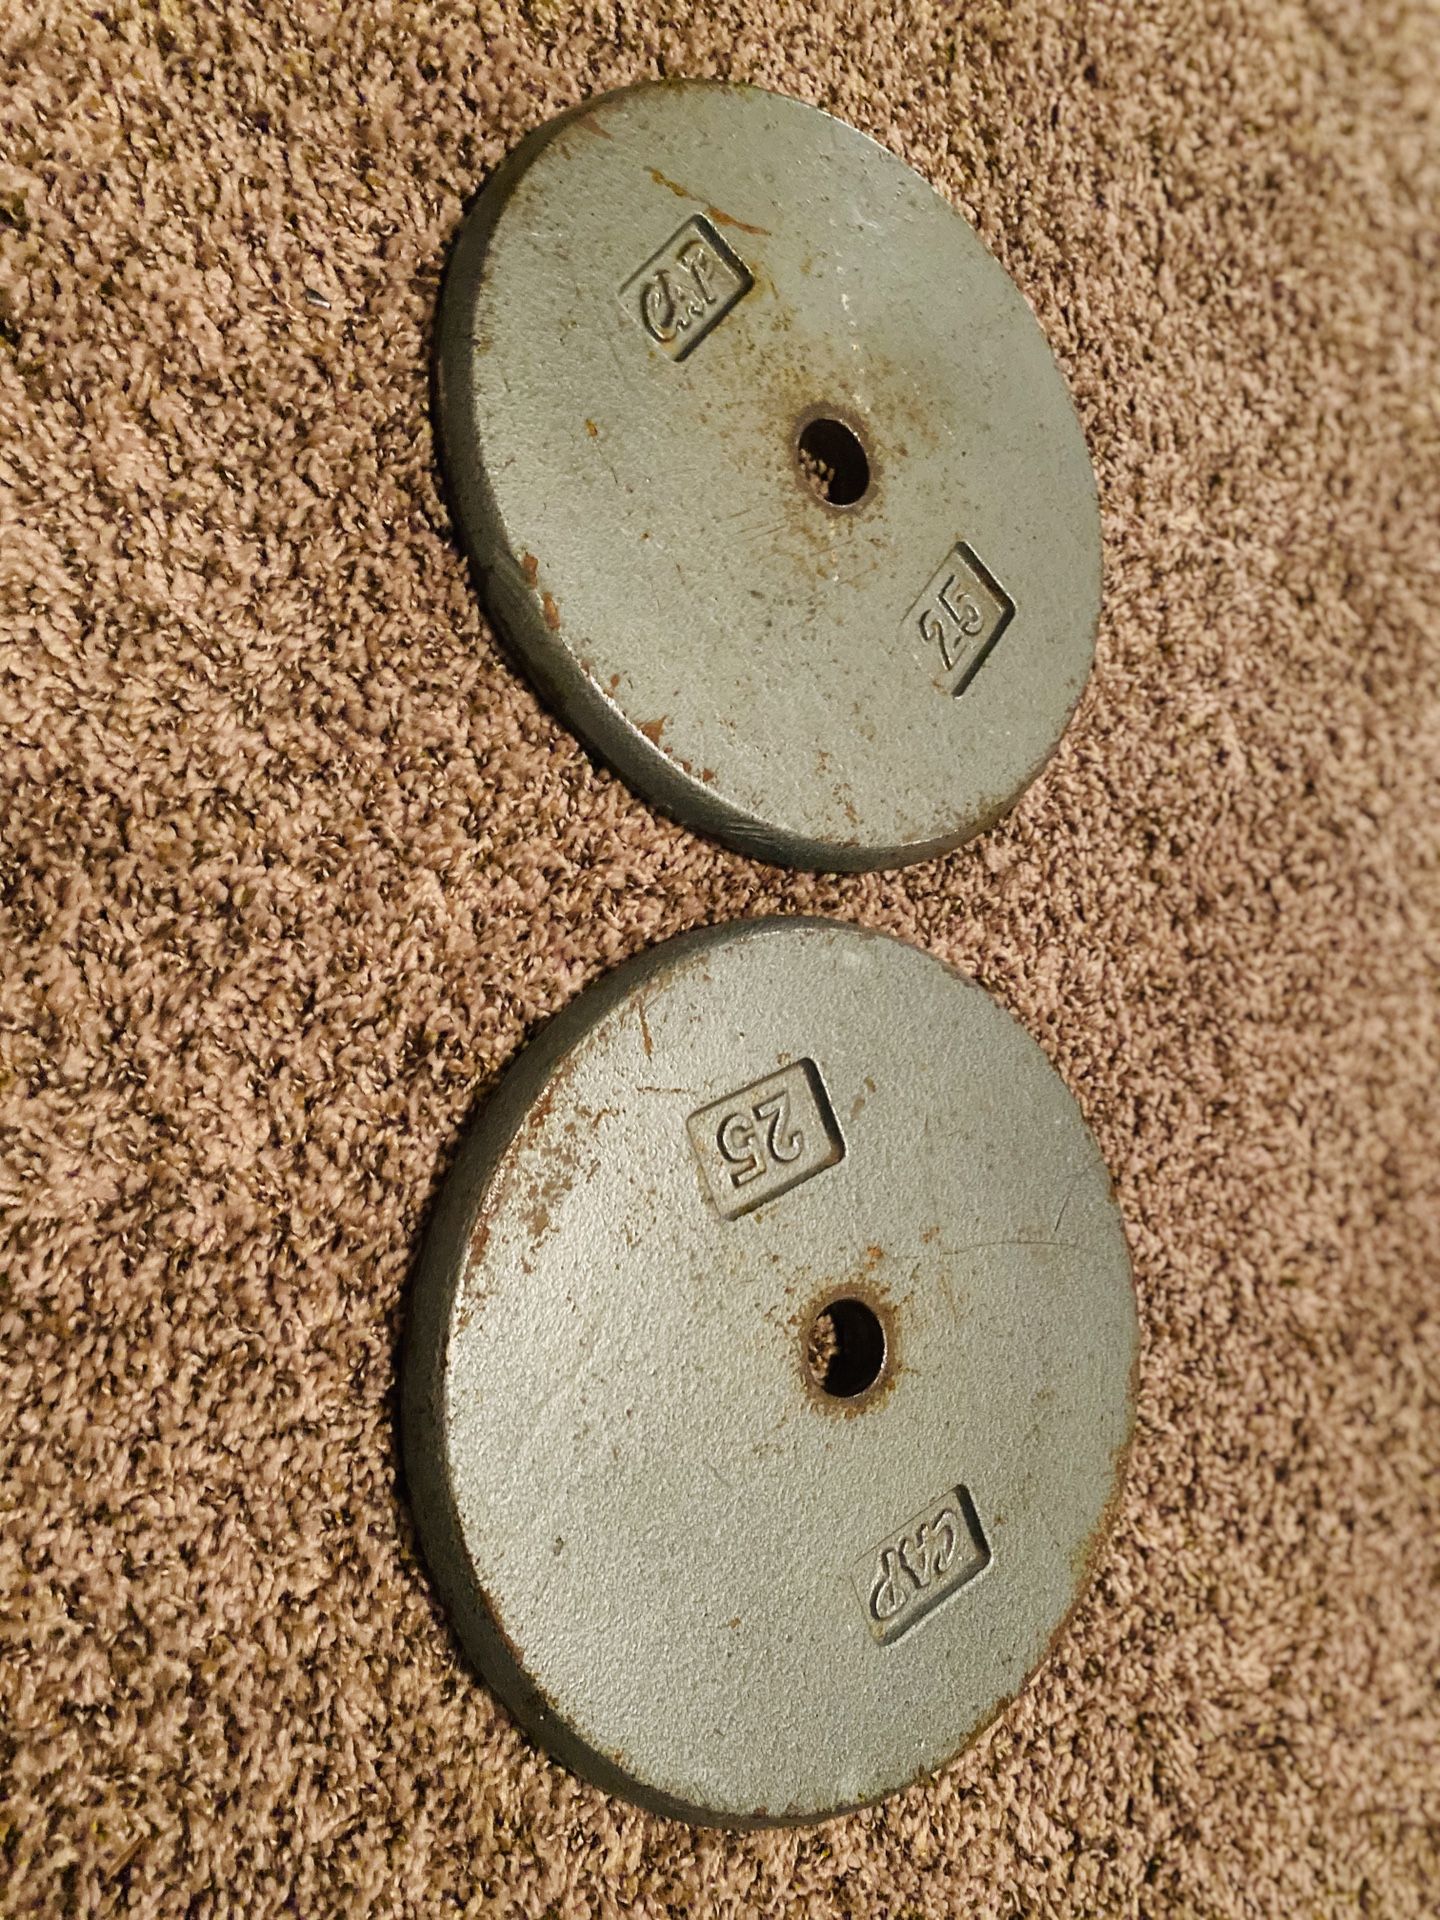 25 lb plates weights